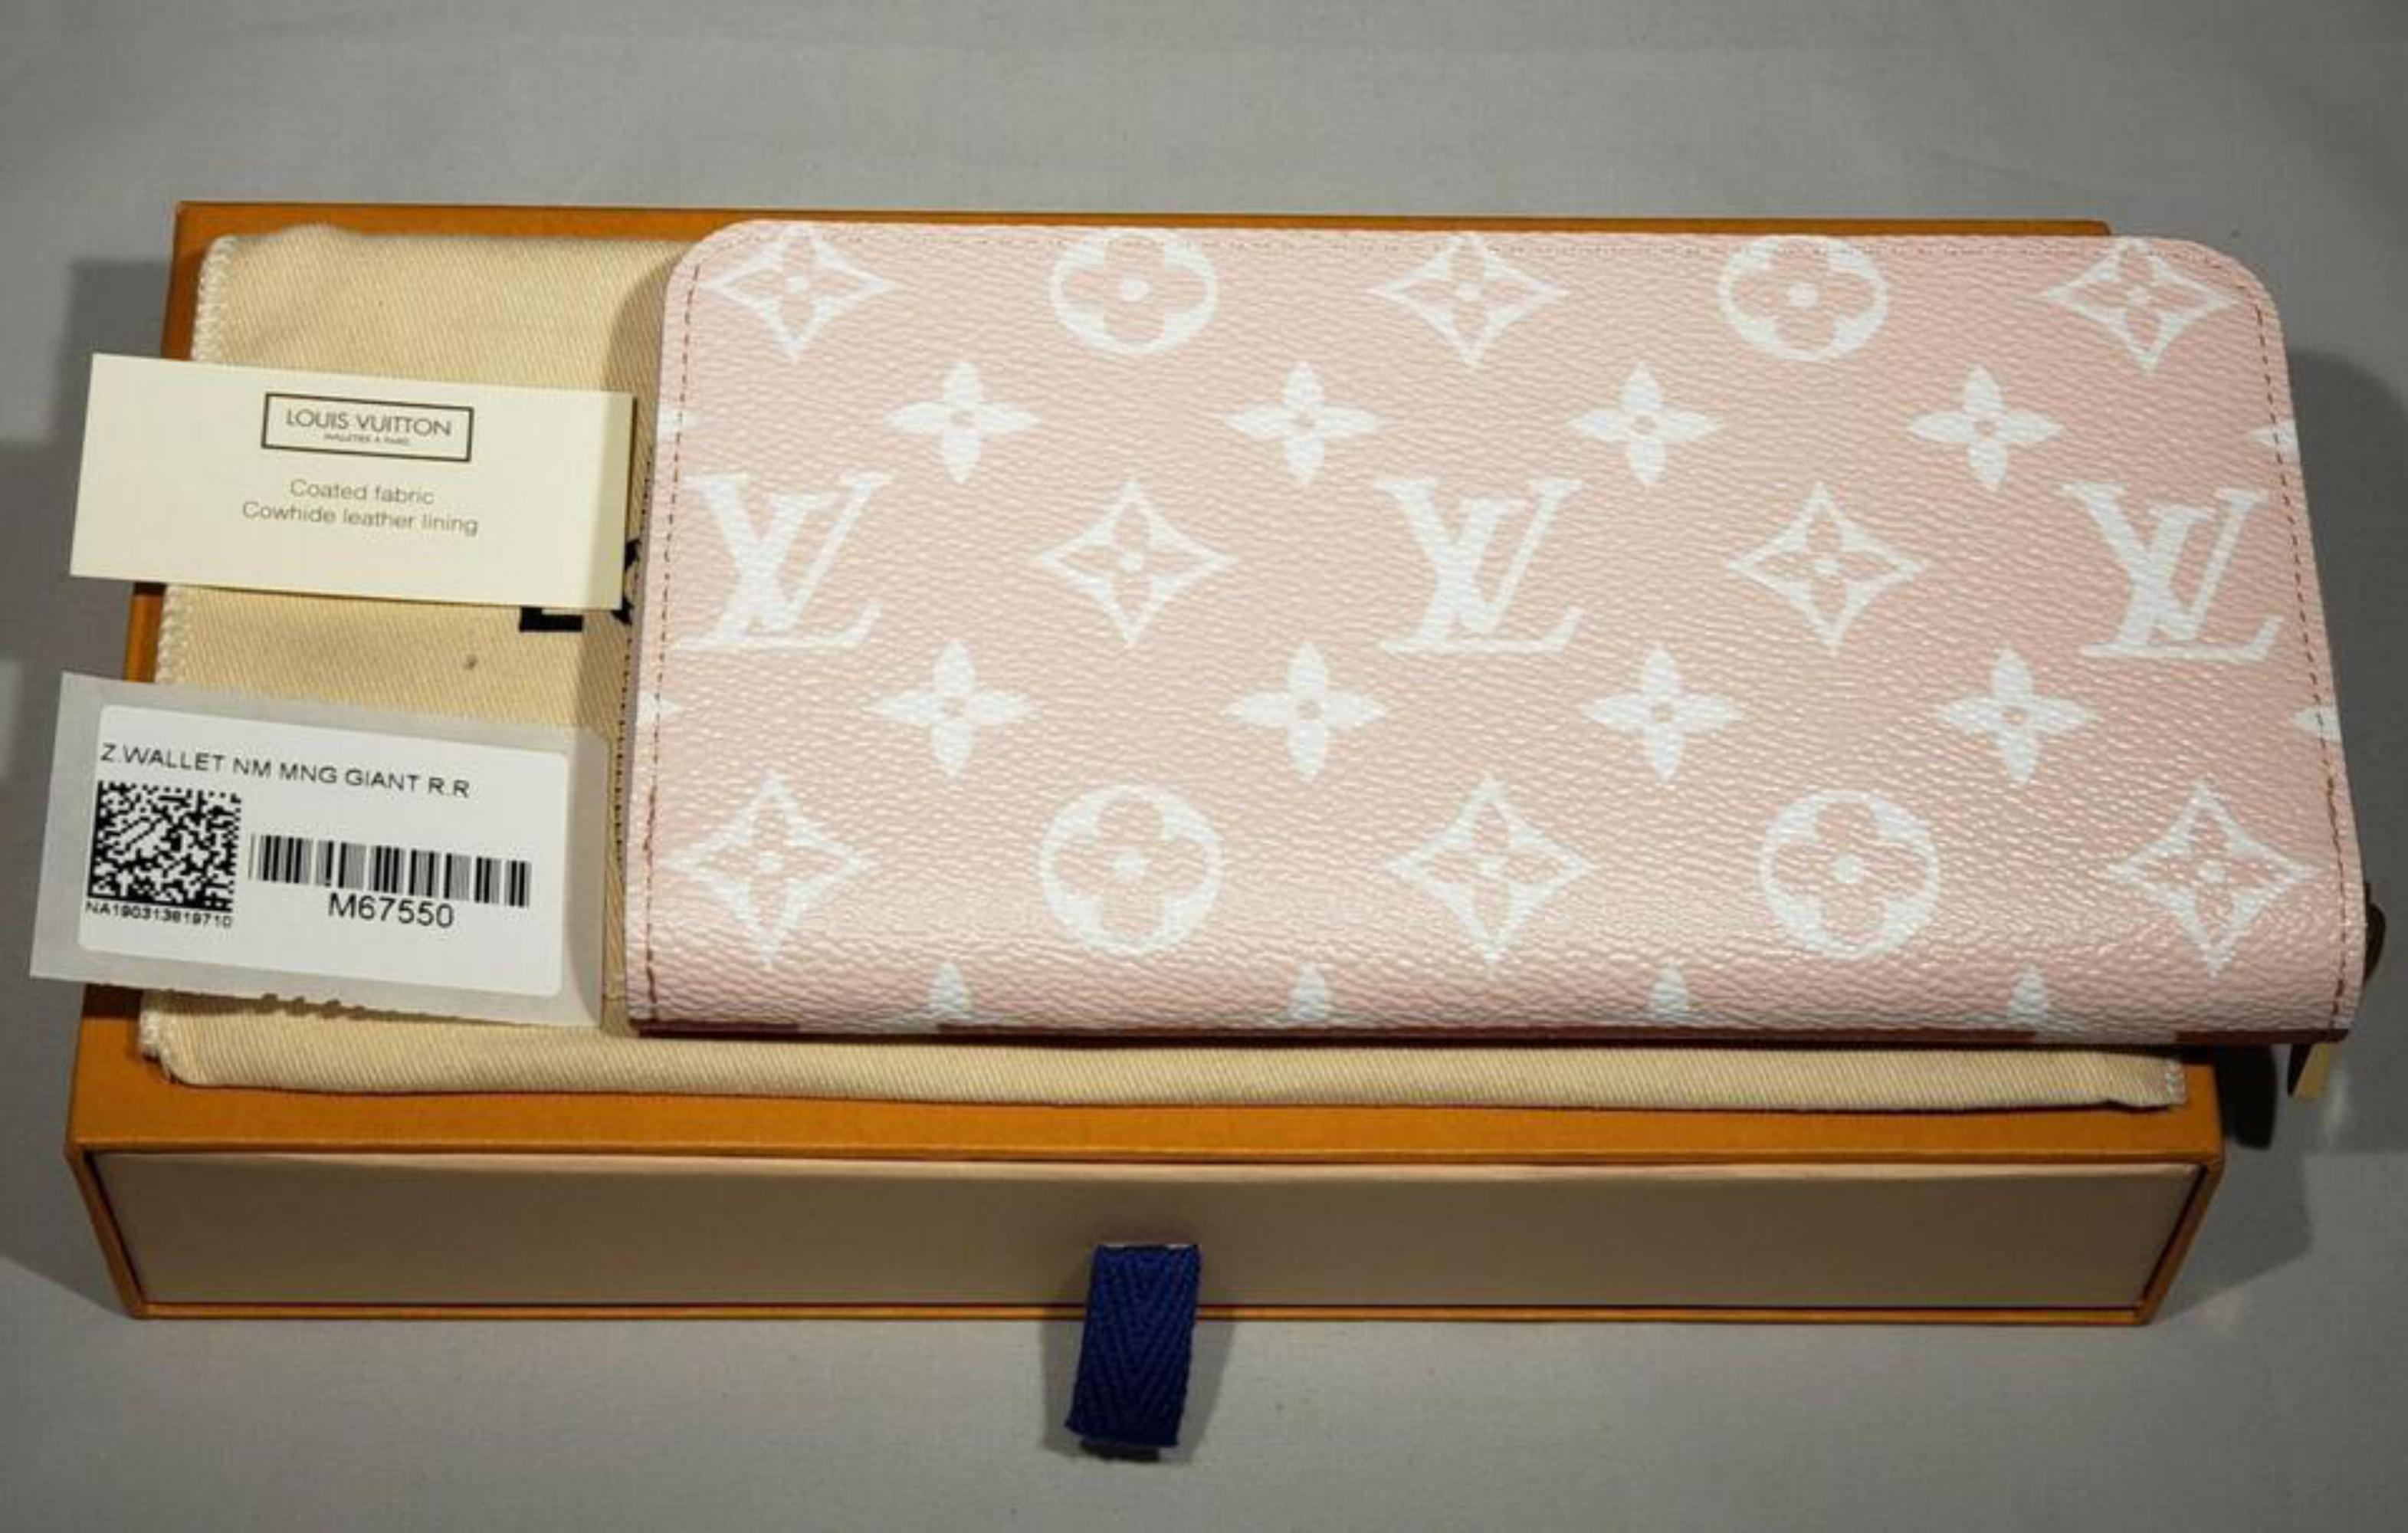 Brand New
(10/10 or NWT)
Includes Gift Box, Dust Bag, Giant Monogram Zippy Wallet, Sticker & Textile Card
Length: 19.5 cm (7.7 in)
Height: 9.9 cm (3.9 in)
Width: 2.5 cm (1.0 in
(ACTUAL WALLET PICTURED)
Features
- Monogram coated canvas 
-